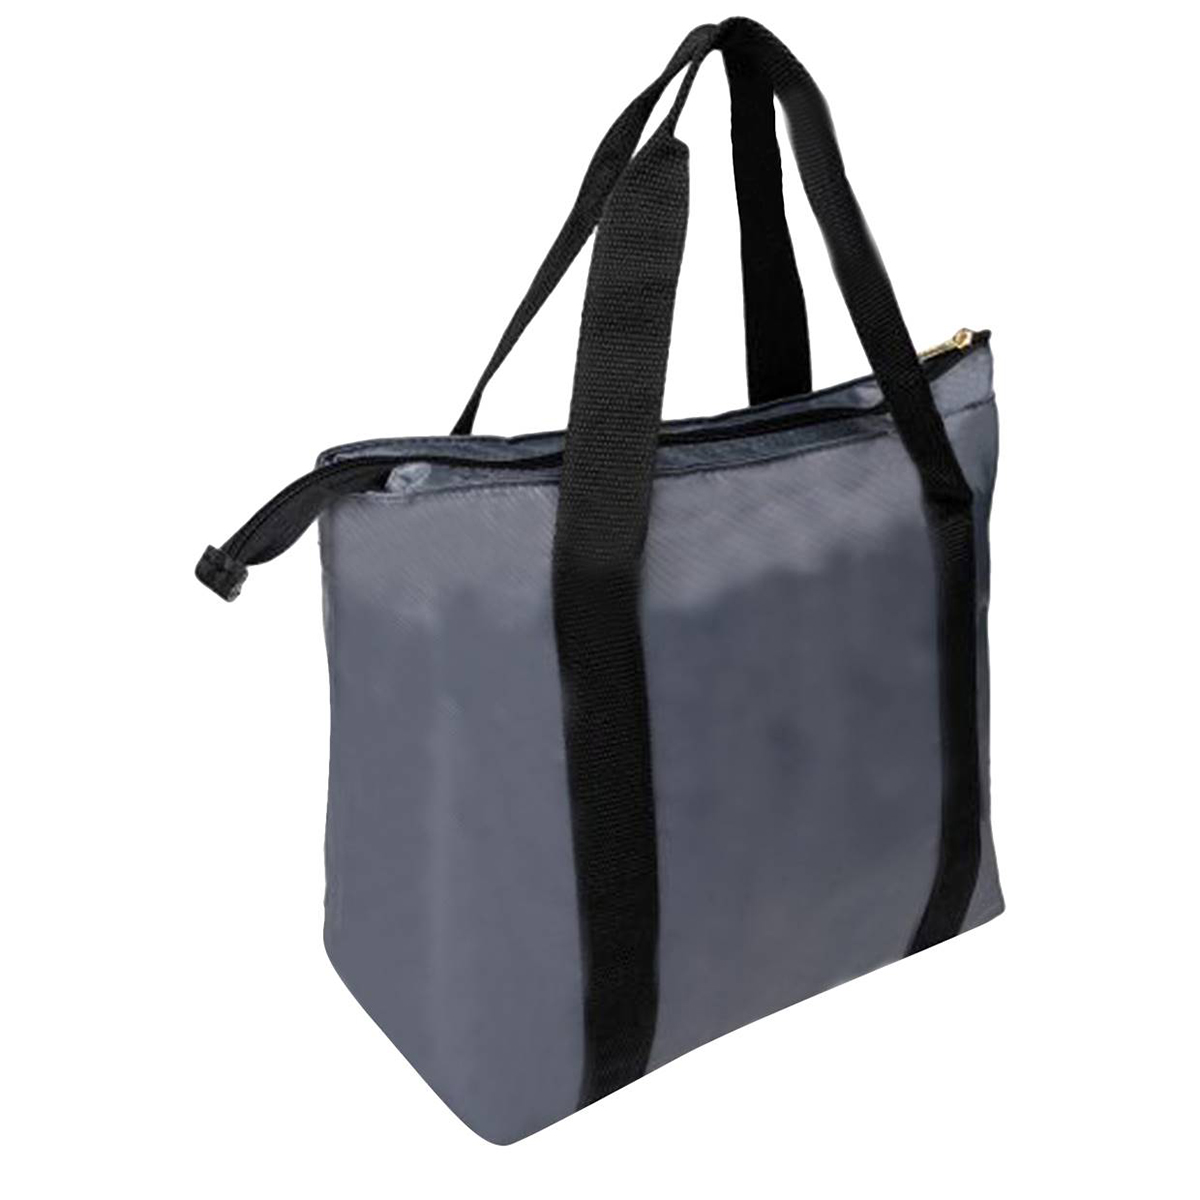 Isaac Mizrahi Vesey Large Lunch Tote